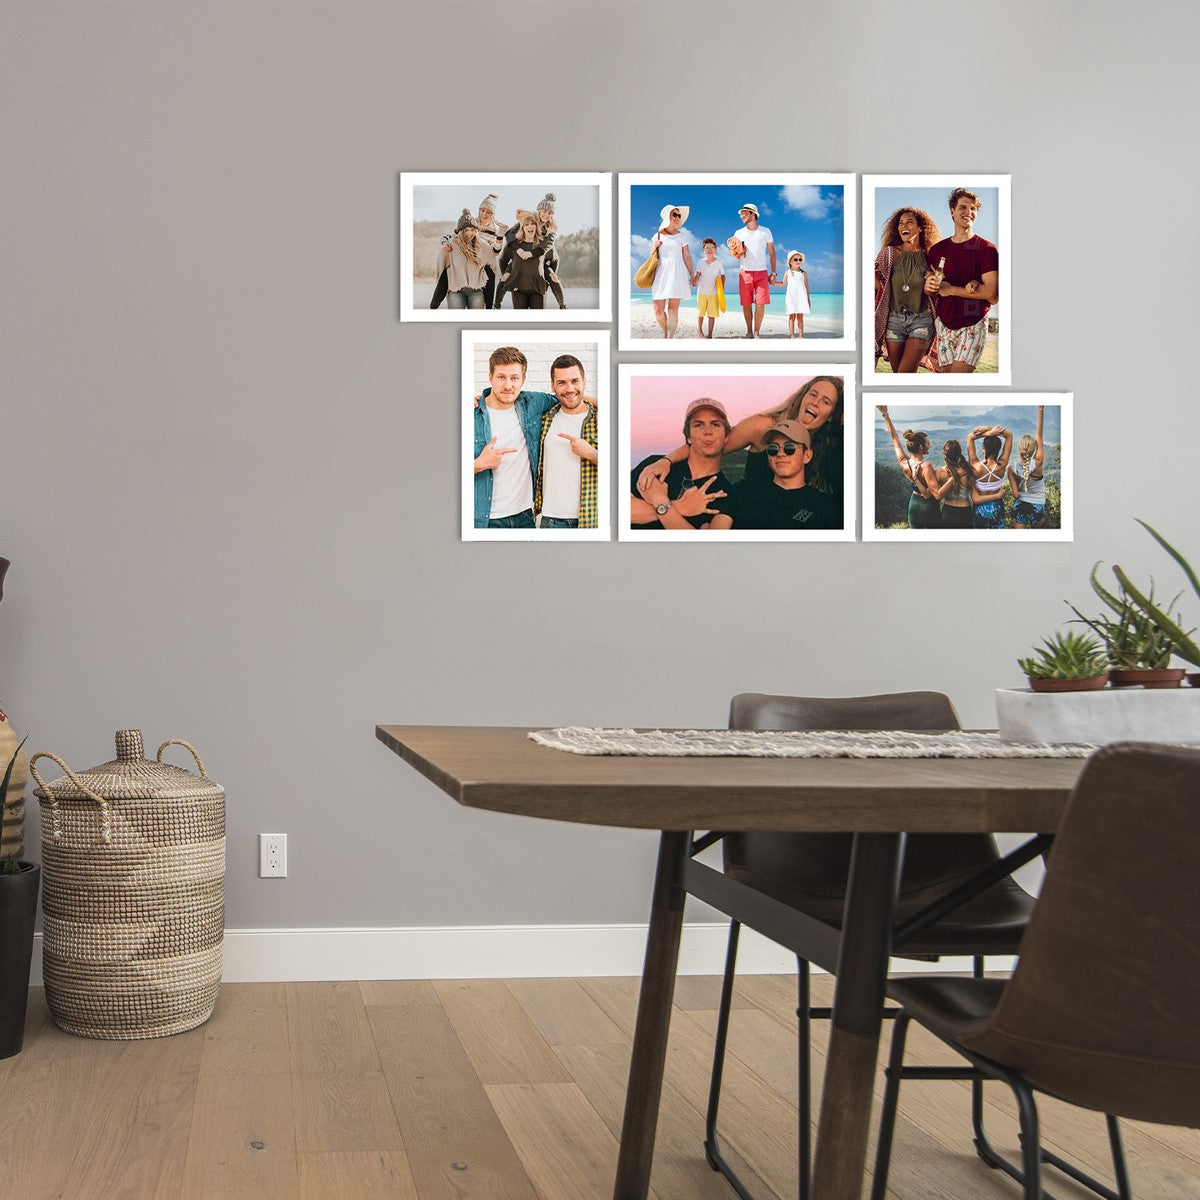 Memory Wall Collage Photo Frame - Set of 6 Photo Frames for 4 Photos of 5"x7", 2 Photos of 6"x8" 2